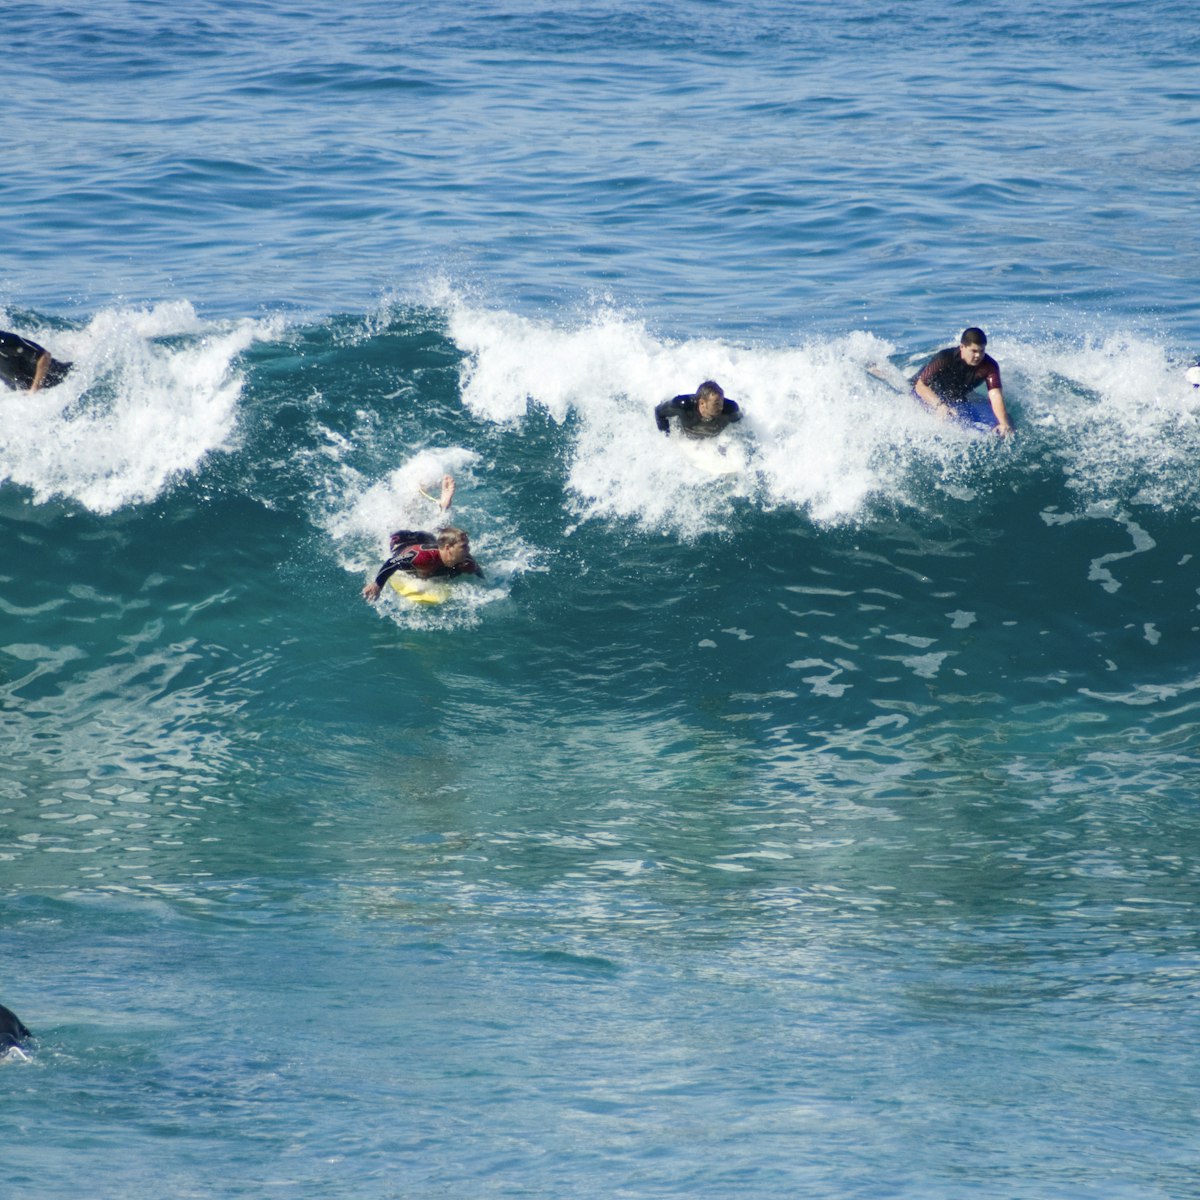 Surfers catching wave at Bronte Beach.